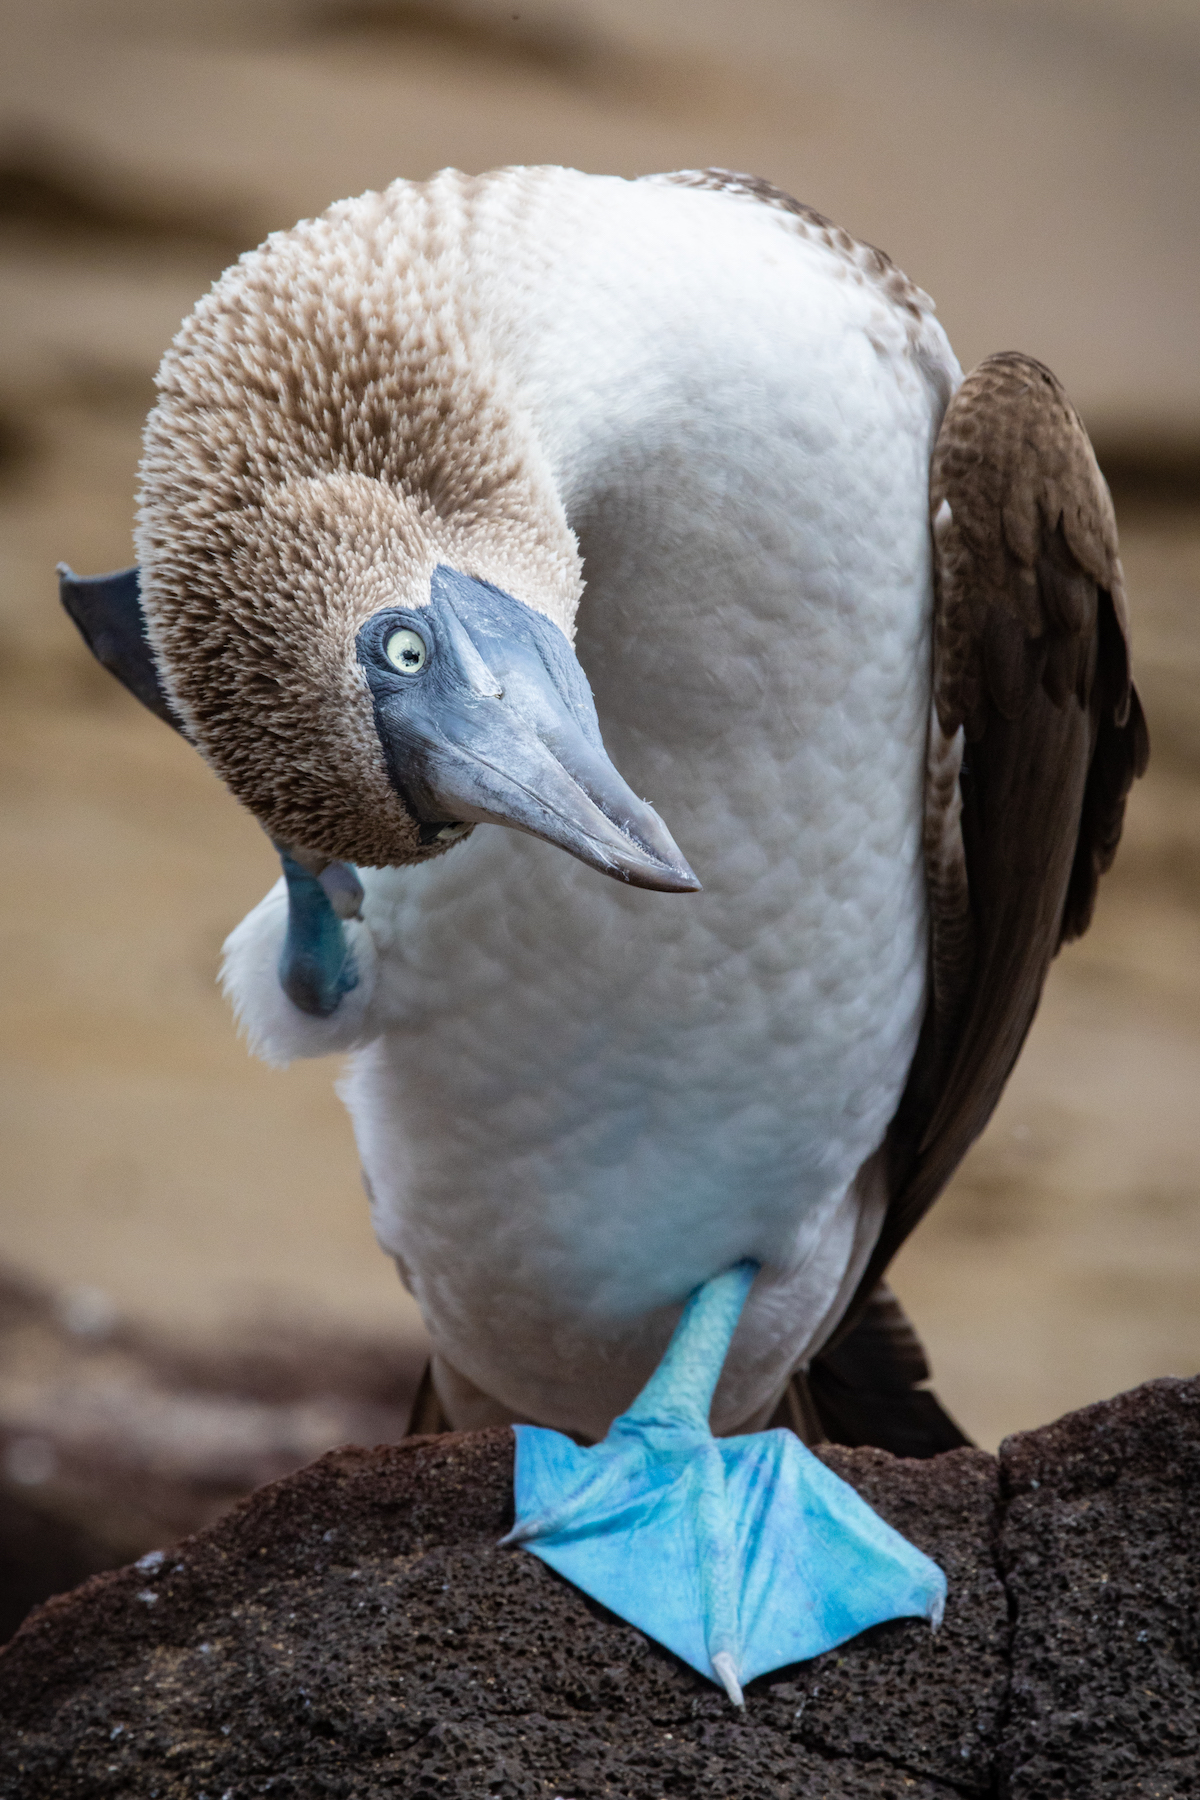 Blue-footed Booby satisfying an itch (image by Inger Vandyke)